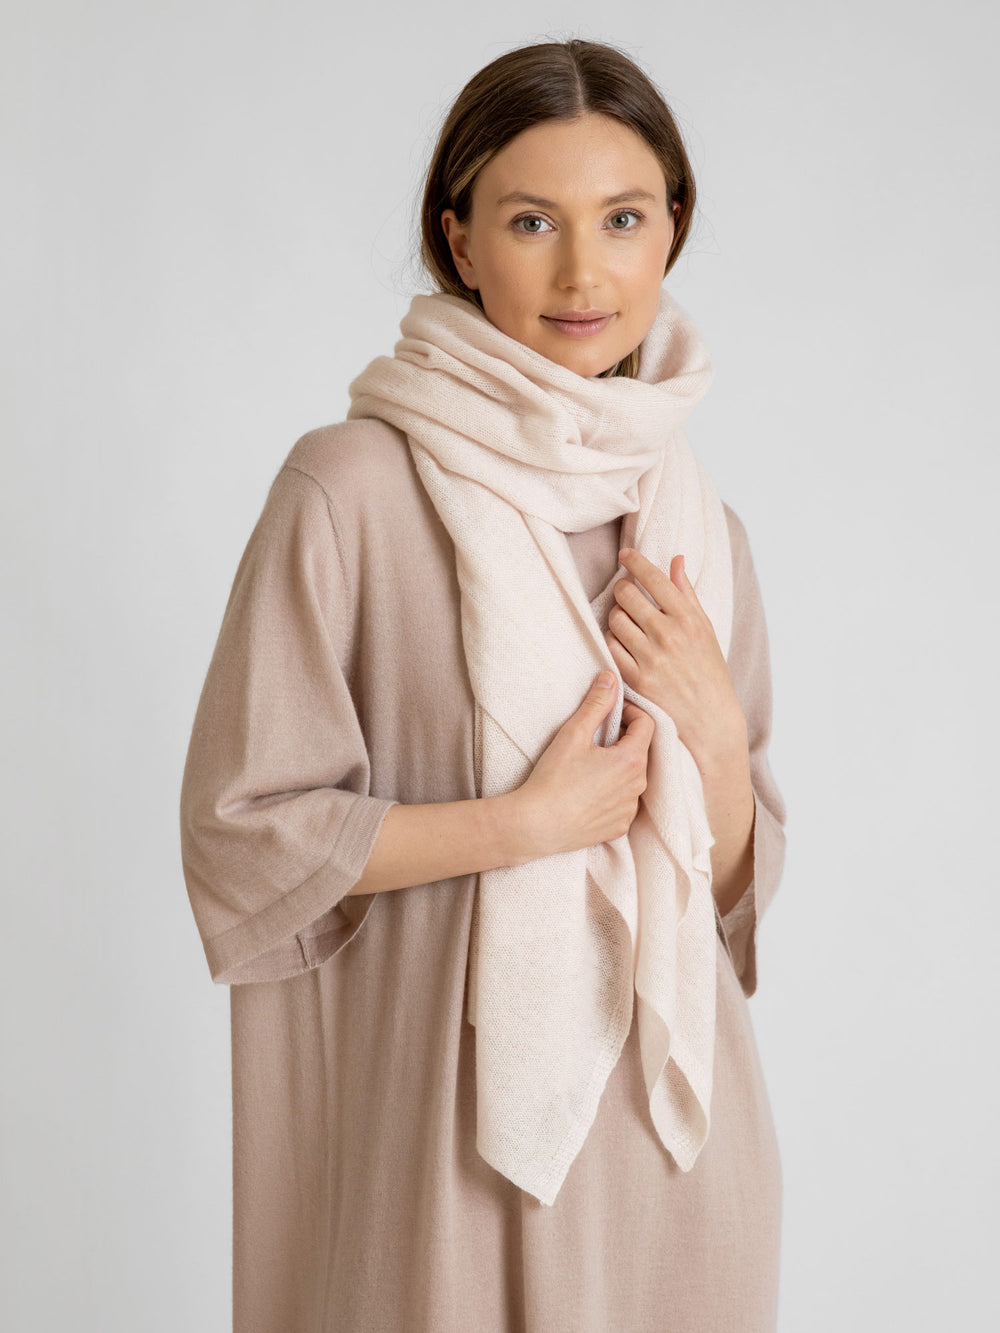 Airy cashmere scarf "Flow" 100% cashmere from kashmina.